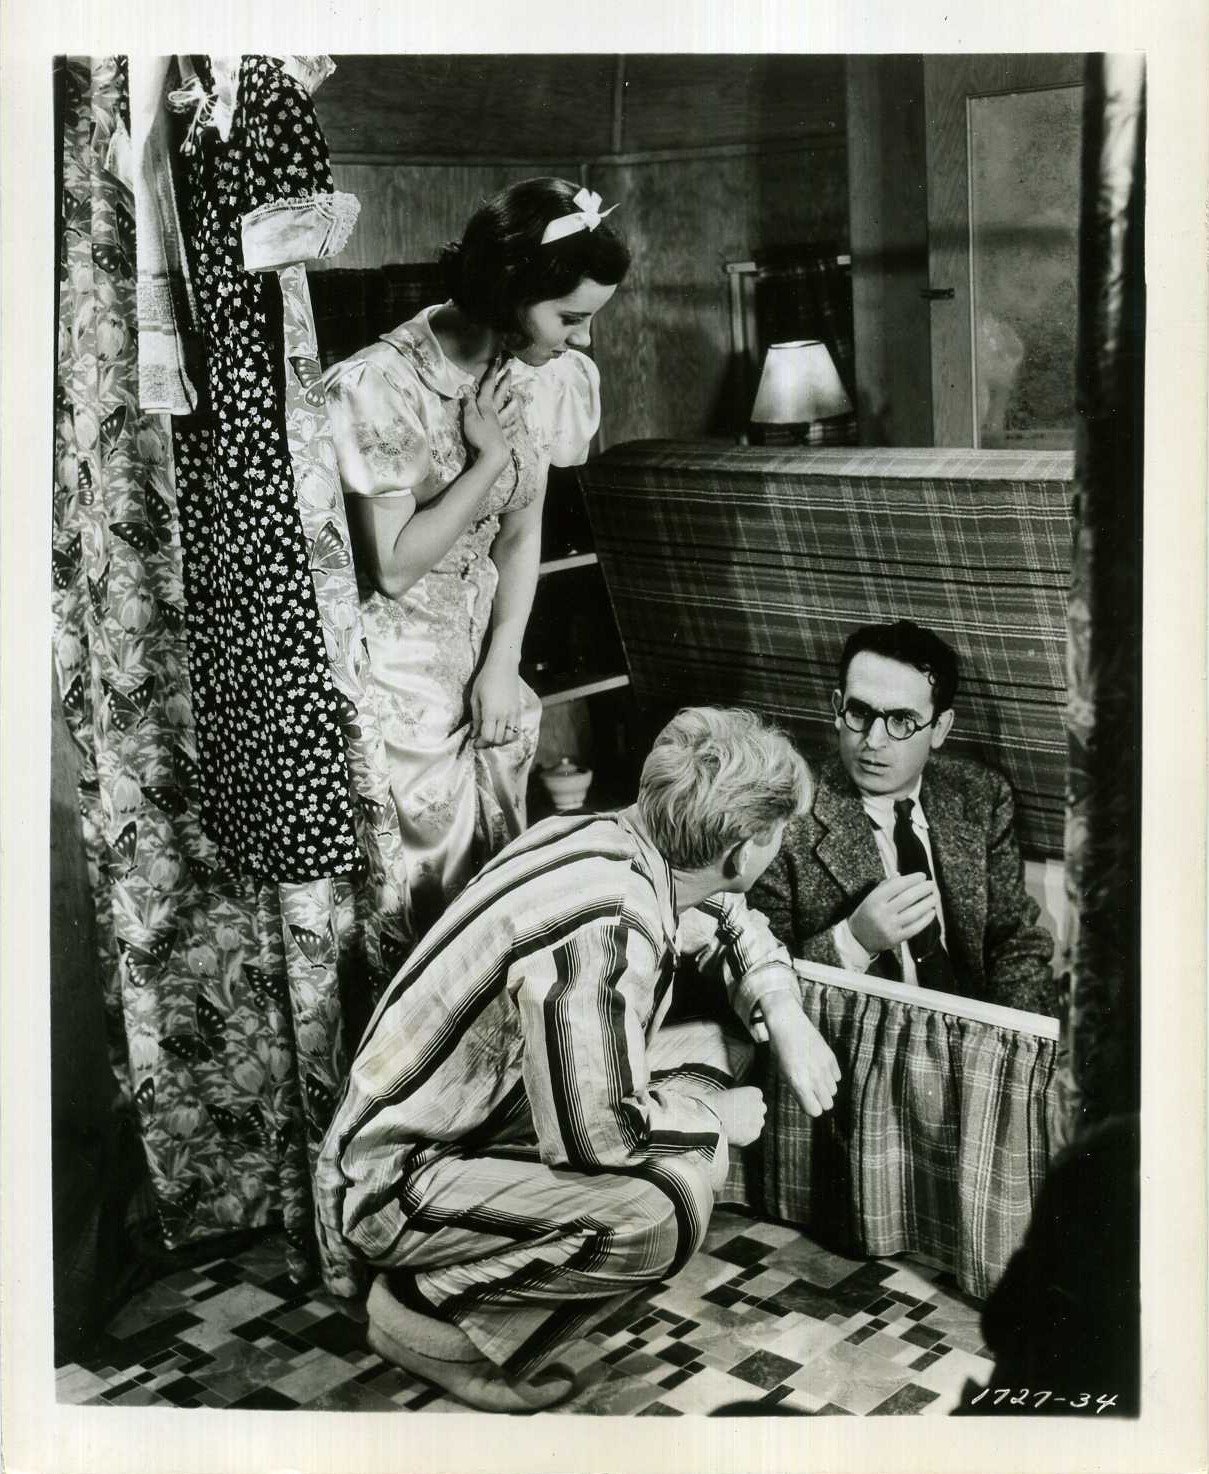 Sterling Holloway, Mary Lawrence and Harold Lloyd in Professor Beware (1938)